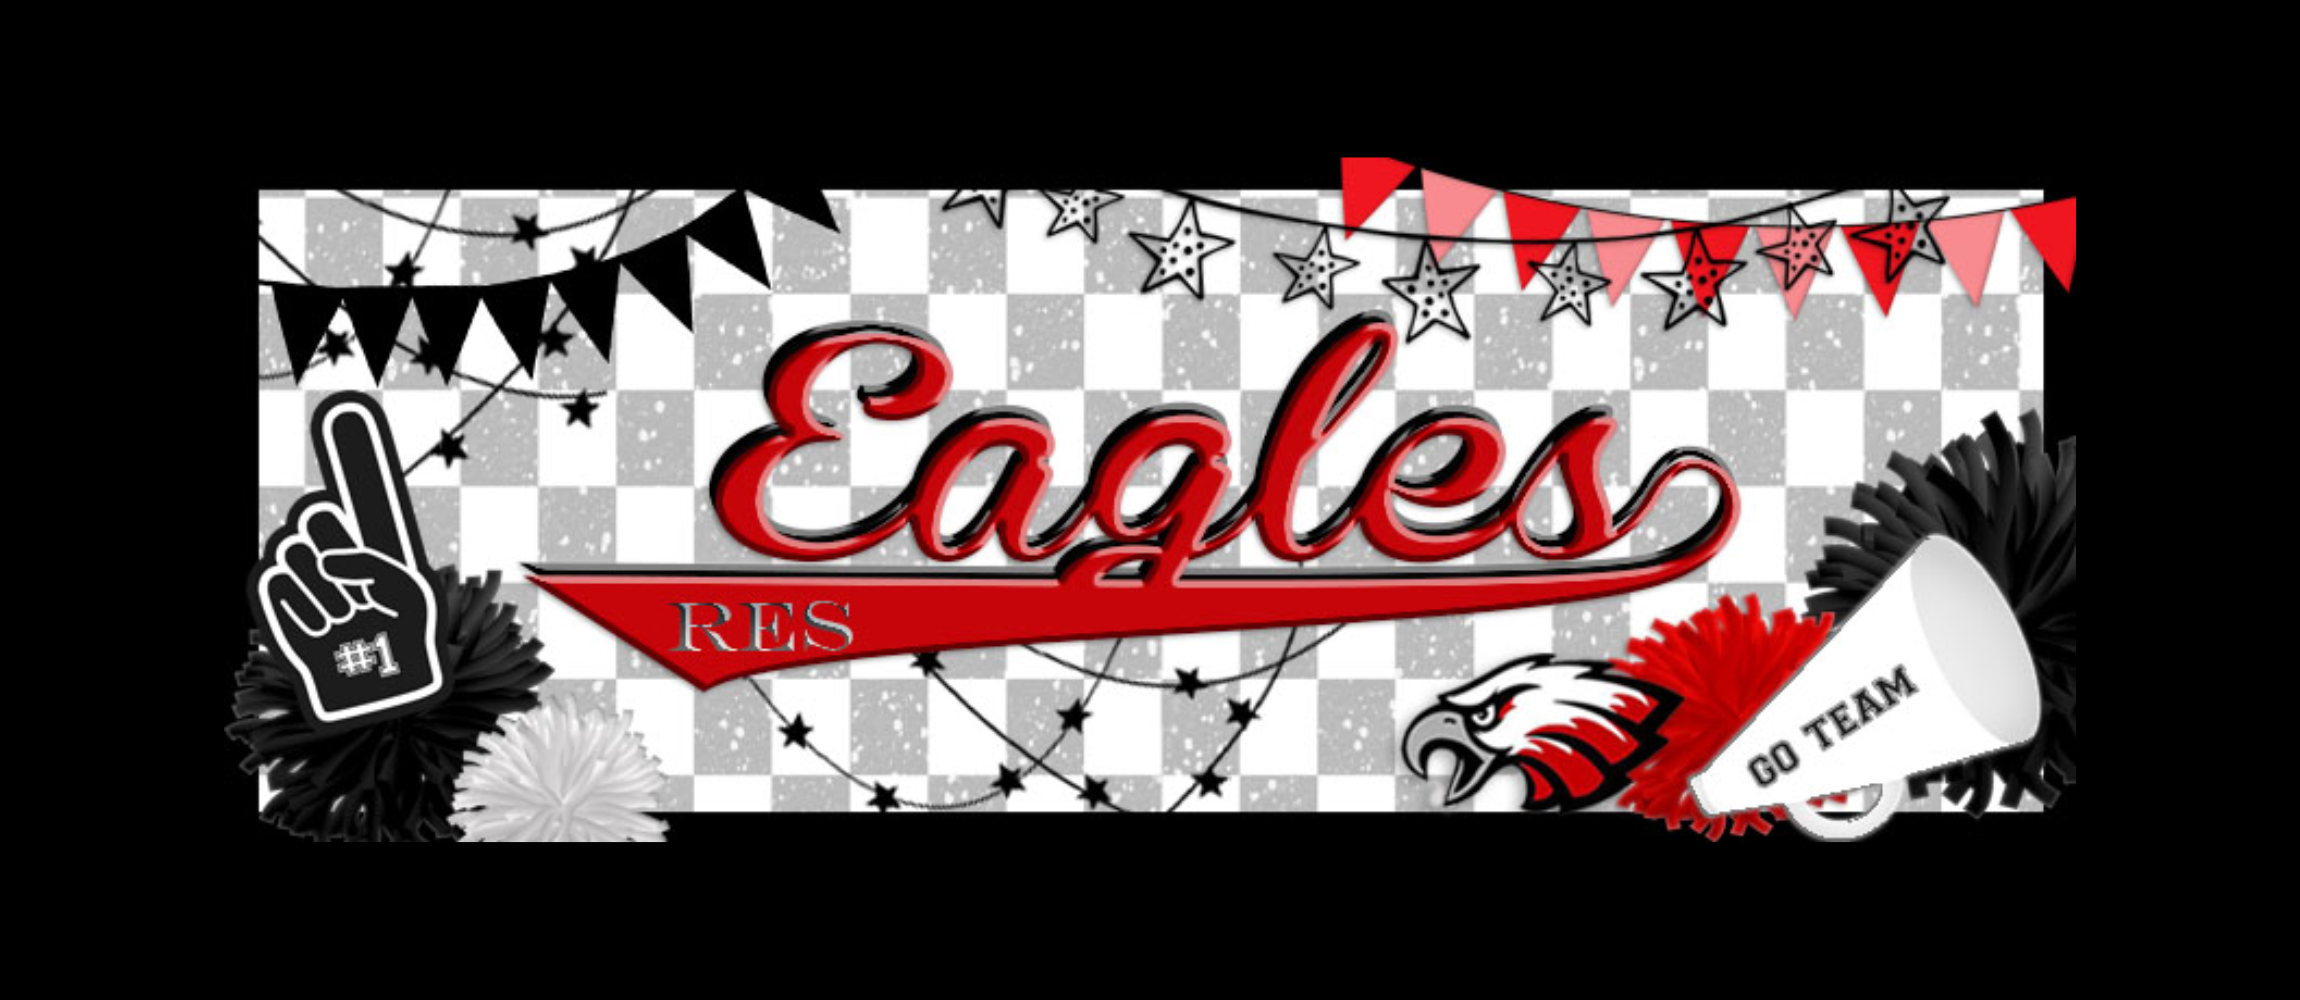 Eagles RES gray, red, white, and black background